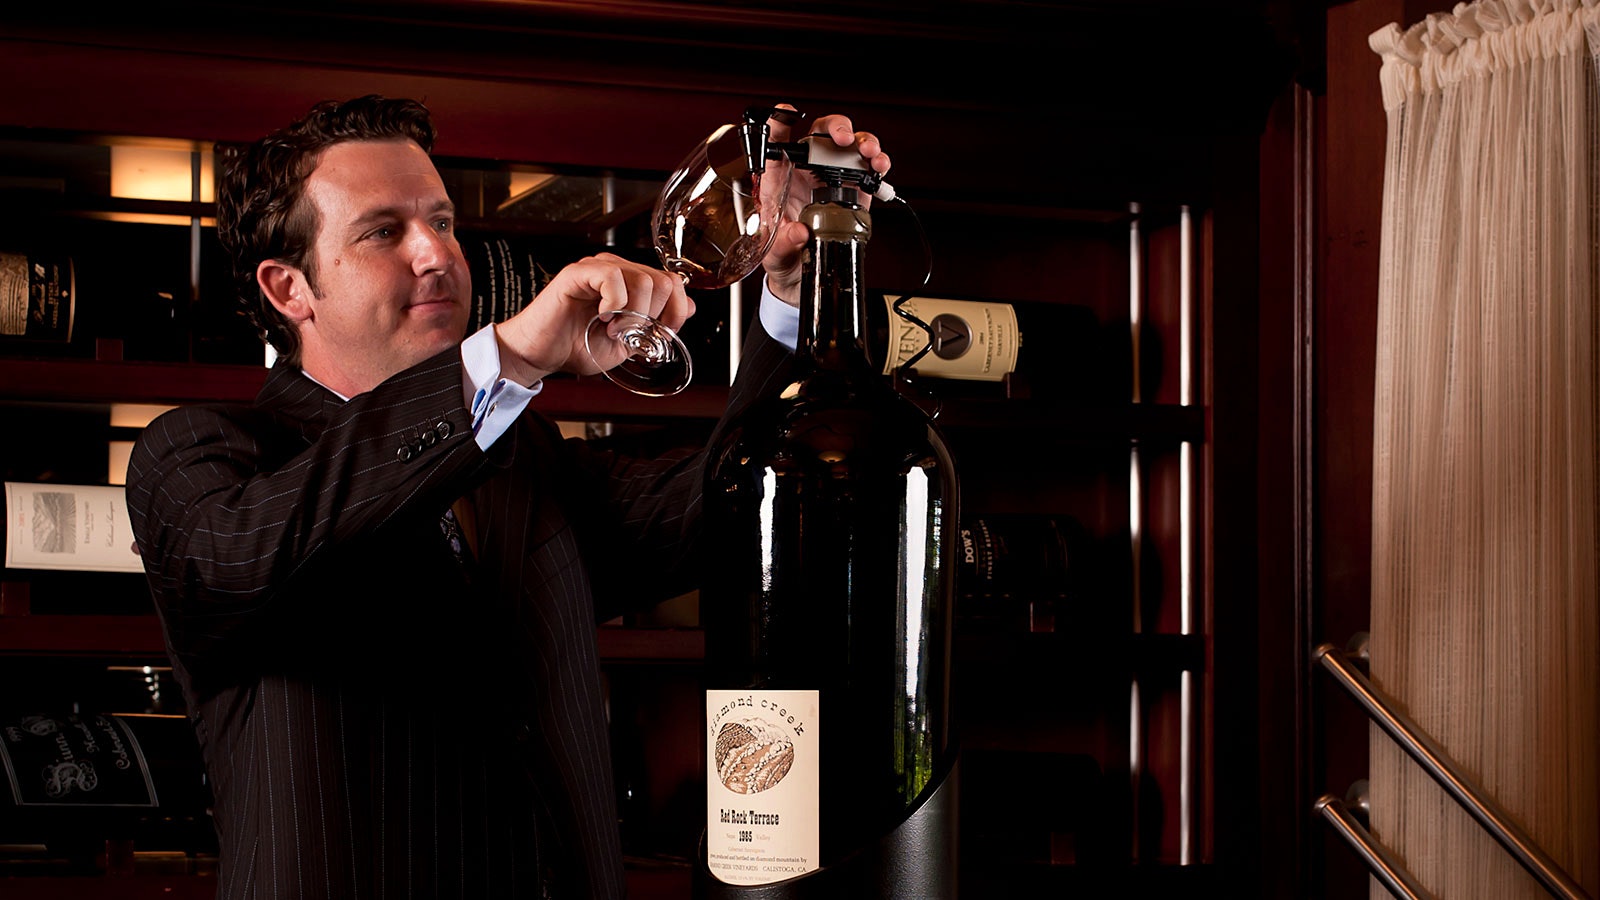  Robert Smith using a Coravin system to pour red wine from a large-format bottle into a glass